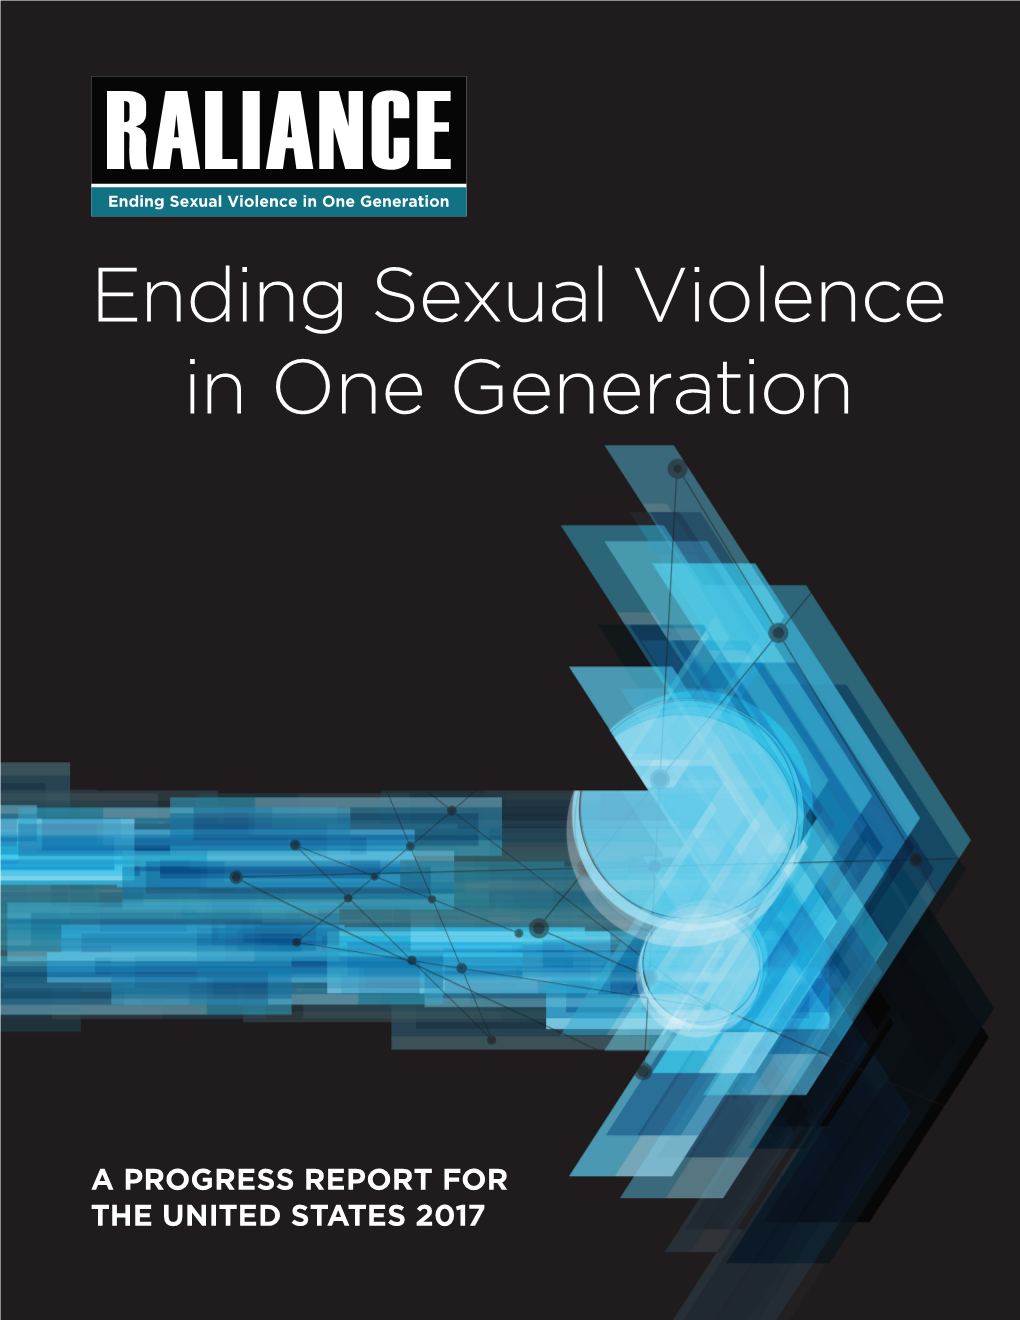 Ending Sexual Violence in One Generation: a Progress Report for the United States 2017